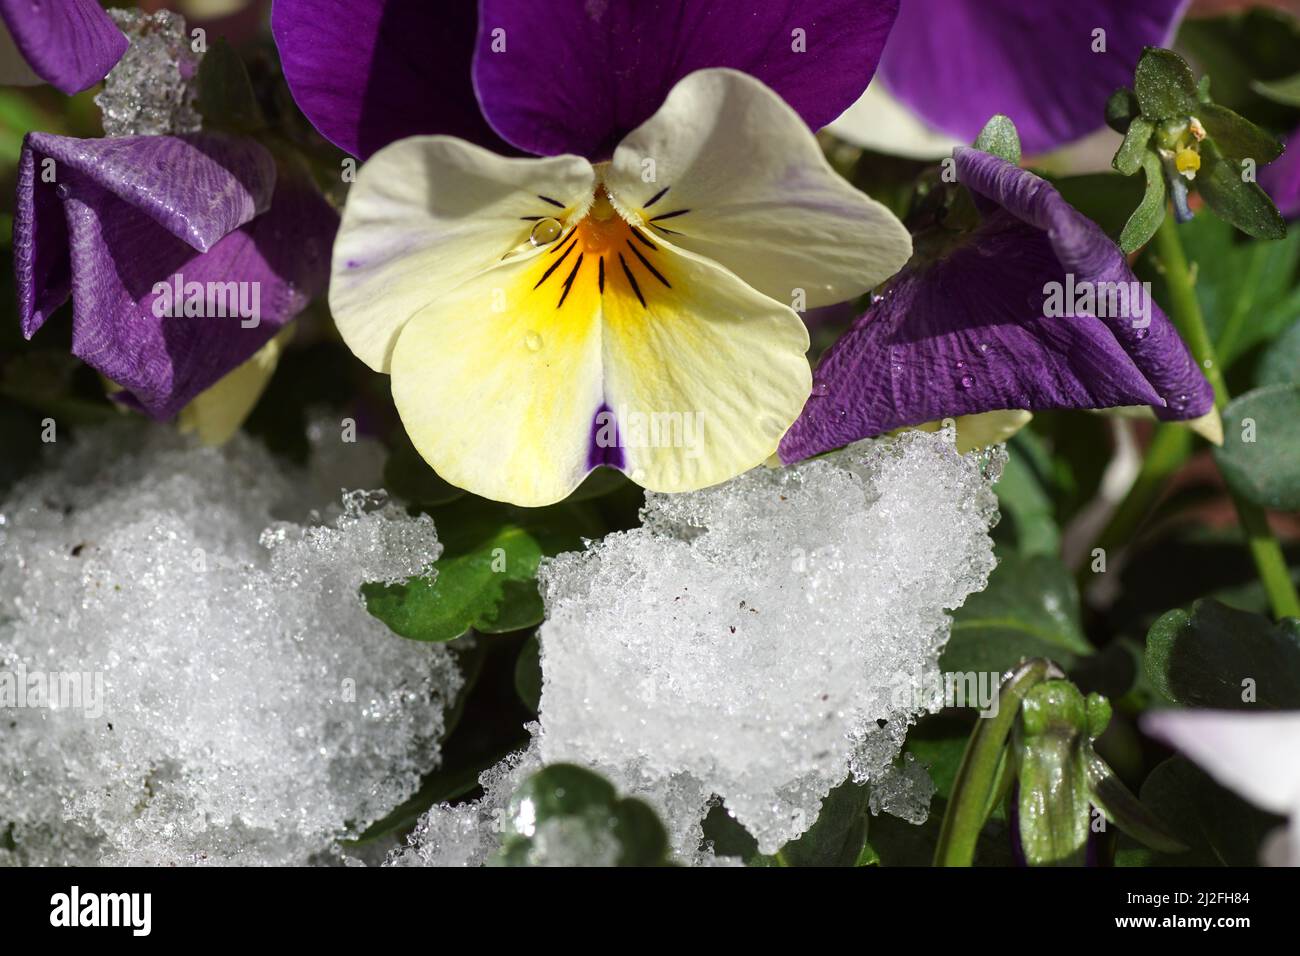 Close up flowers of Garden pansies. Violets (Viola) in the melting snow. Violet family Violaceae. Plants with multicolor flowers. Stock Photo